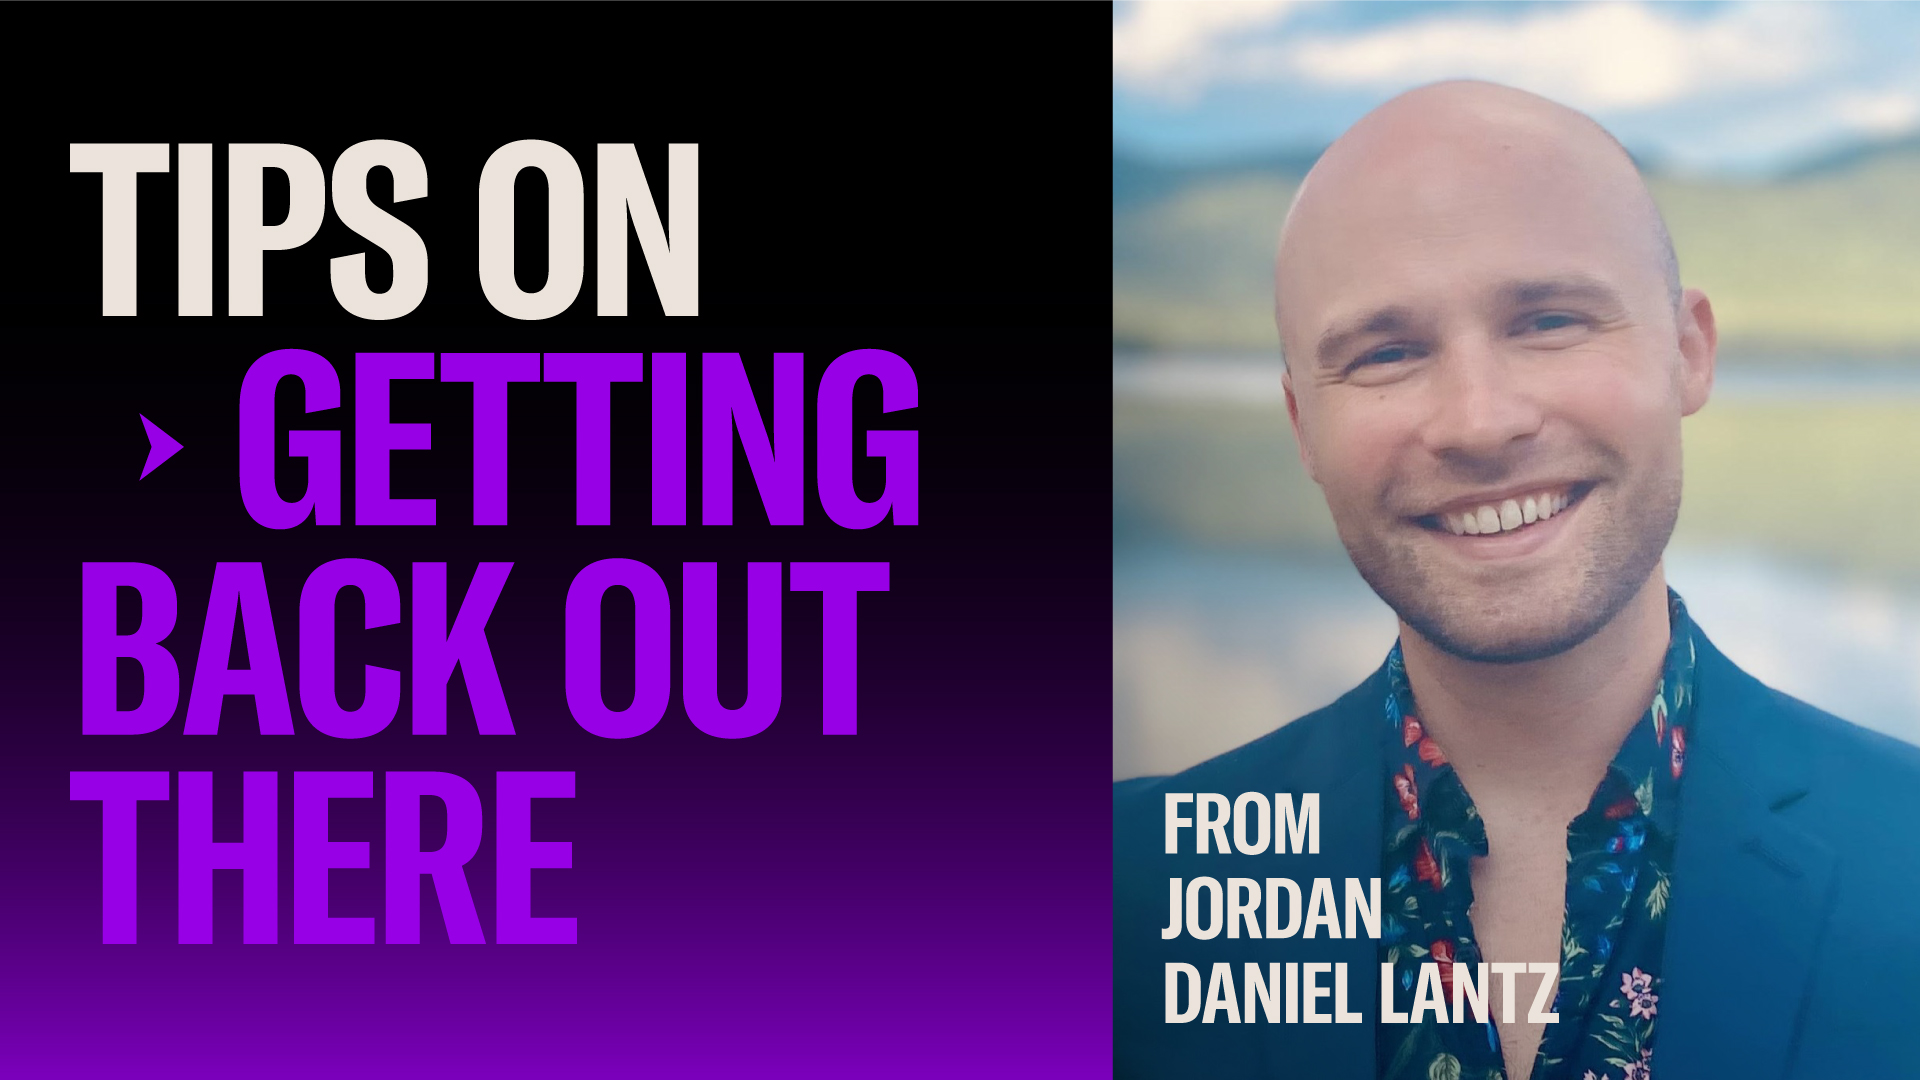 5 TIPS FOR DIVING BACK INTO THE DATING POOL  Jordan Daniel Lantz is a marketer and writer focused on the ups and downs of queer dating. His current project, The Guy and the Grub, is a personal blog that grades both the restaurants he visits and the guys he dates.